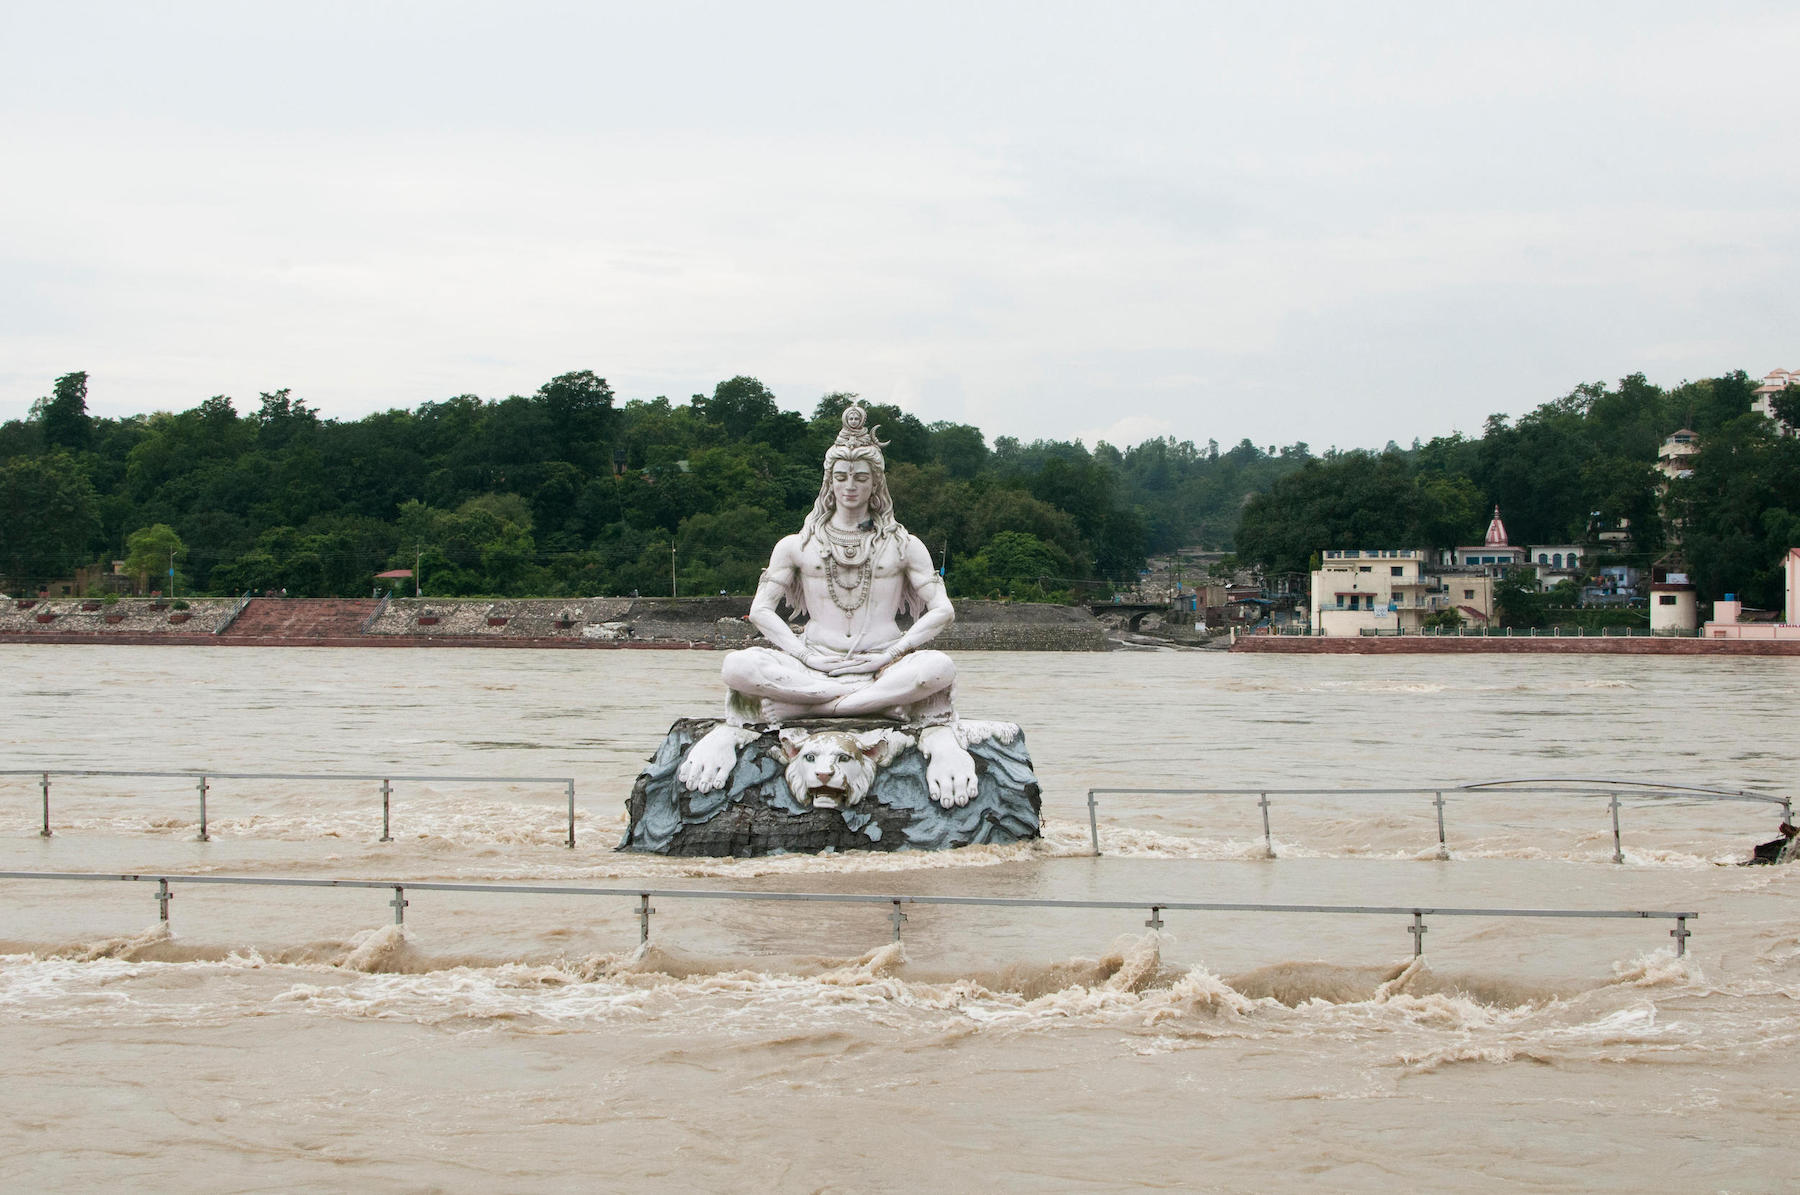 <p>A statue of the Hindu god Shiva in the middle of the Ganga river, which overflowed due to heavy rains in Rishikesh, Uttarakhand, in 2011 [image by: Scarabea / Alamy]</p>